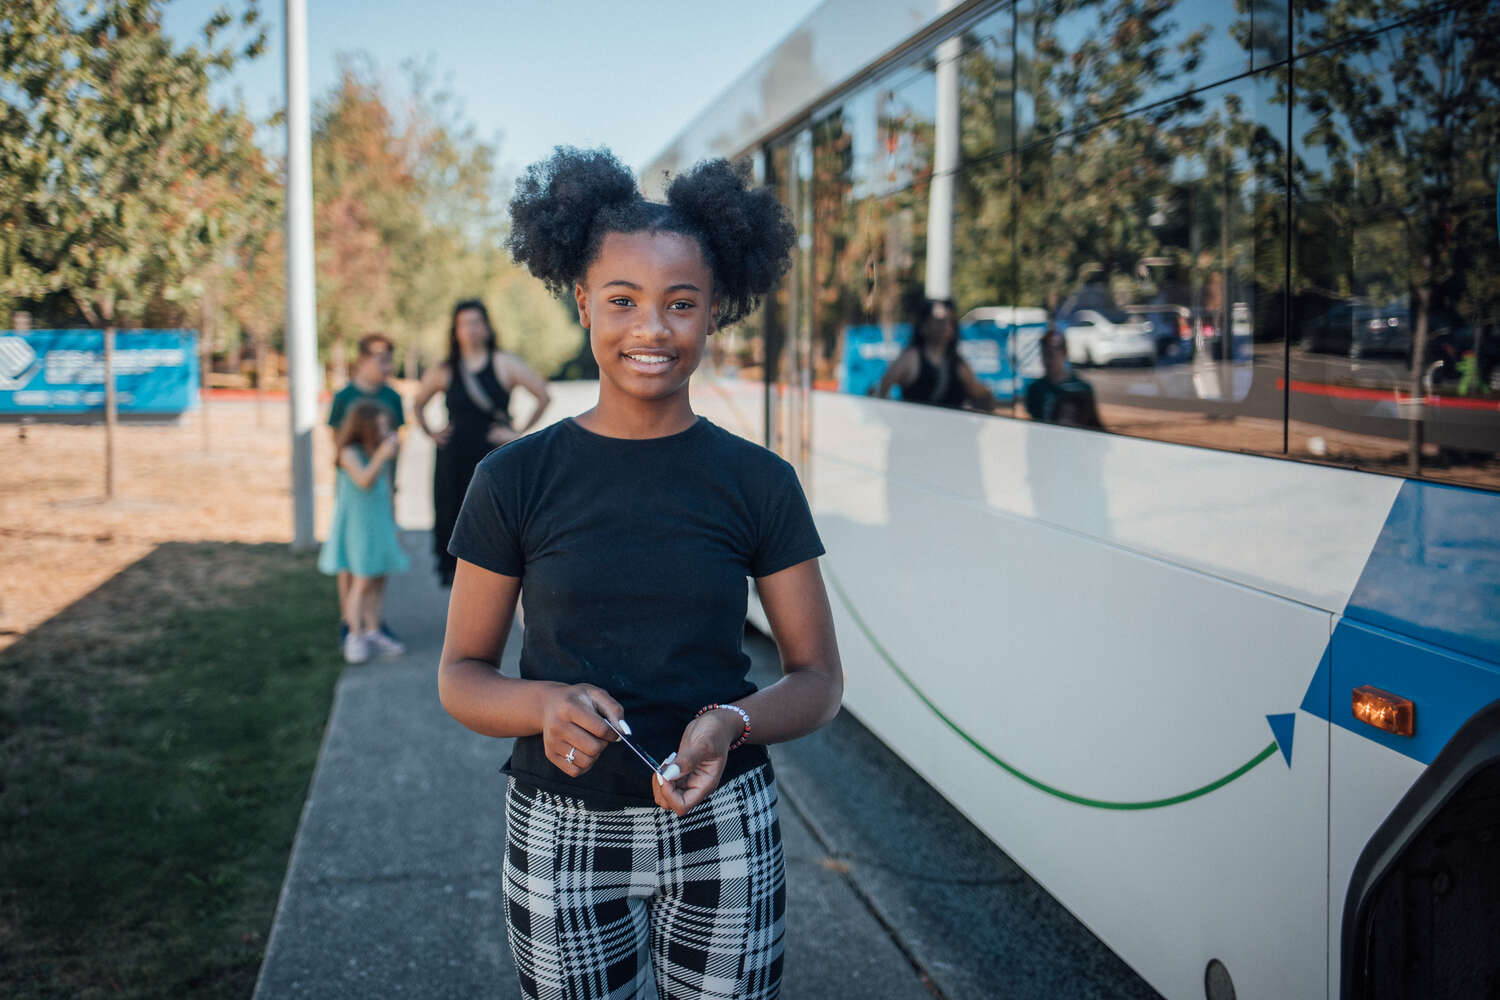 Youth pay no fare when they ride with Community Transit.